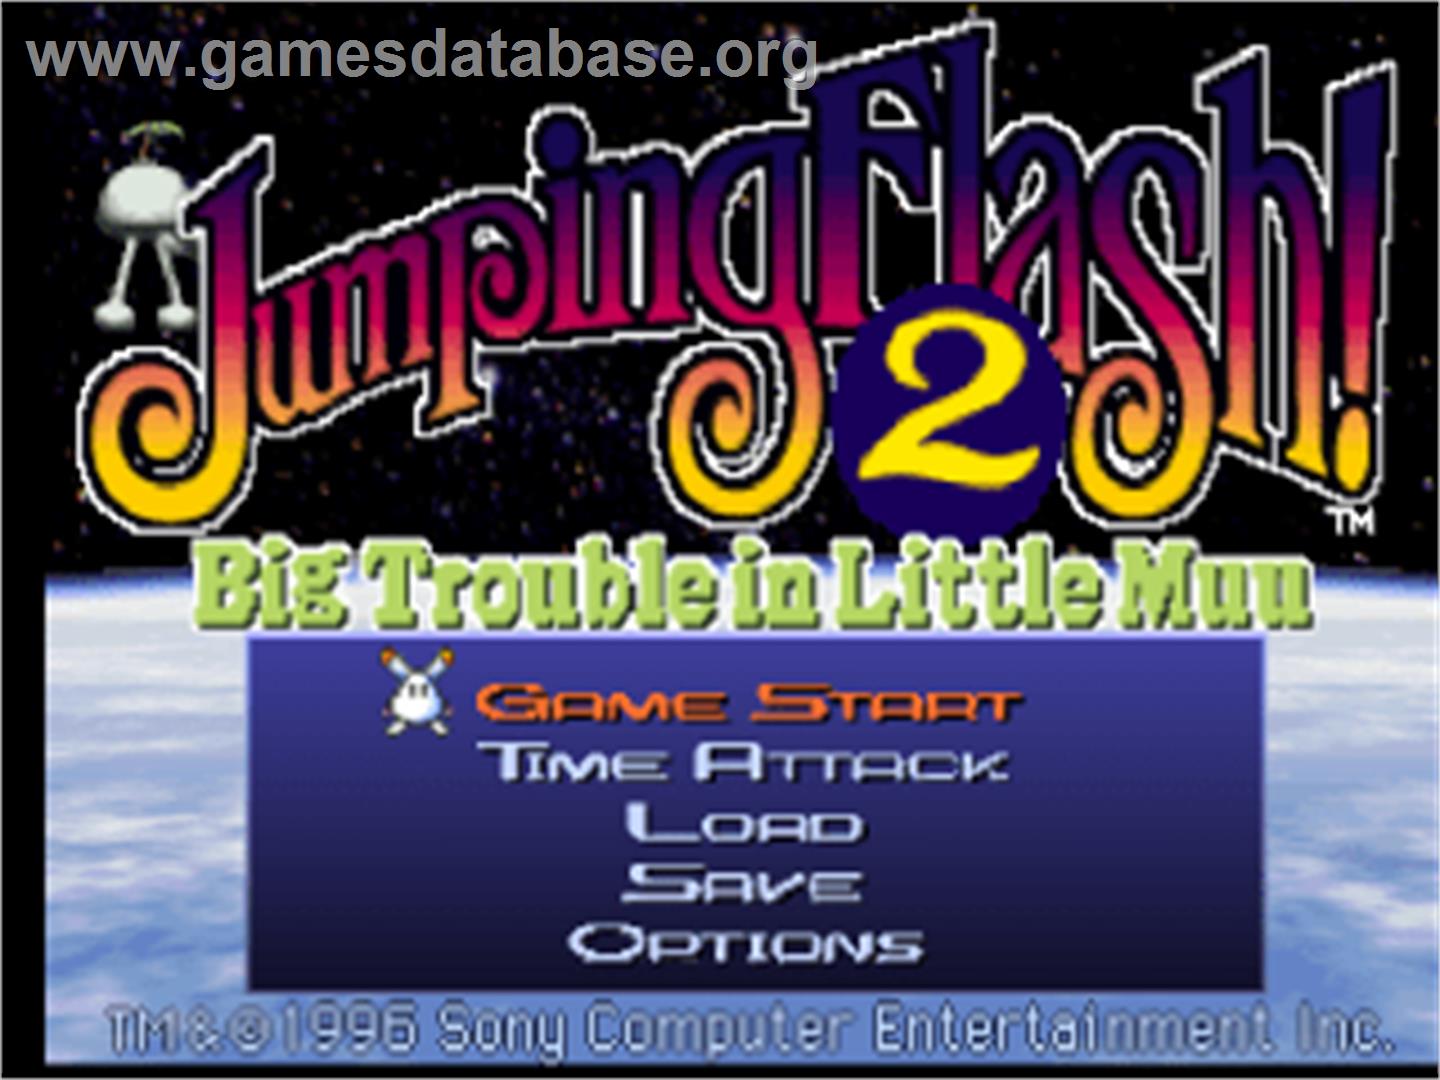 Jumping Flash! 2 - Sony Playstation - Artwork - Title Screen